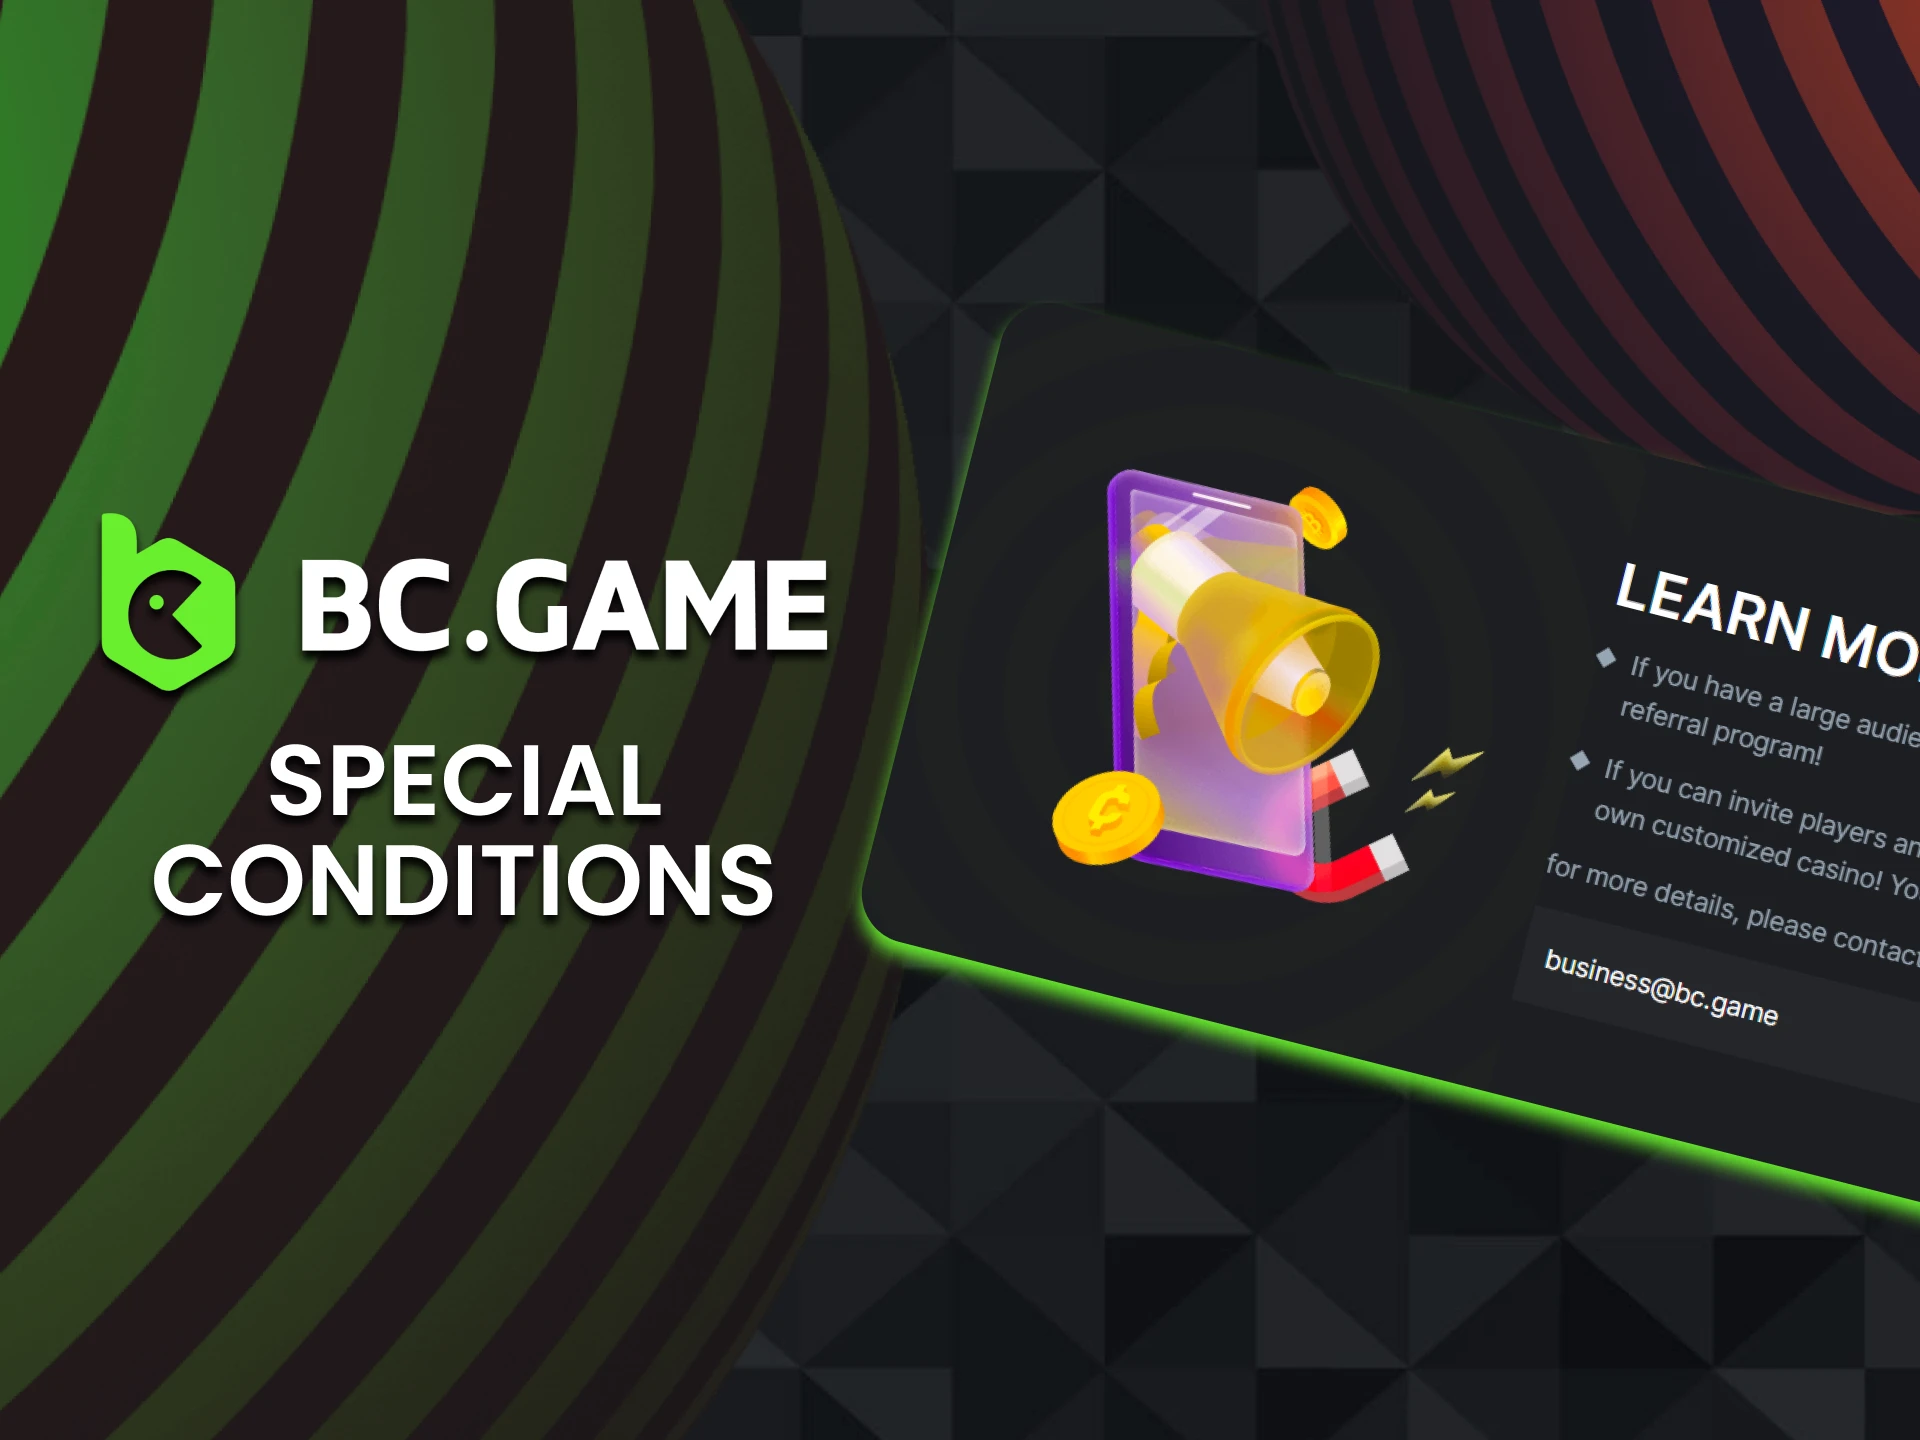 We will tell you about the special conditions of the BCGame affiliate program.